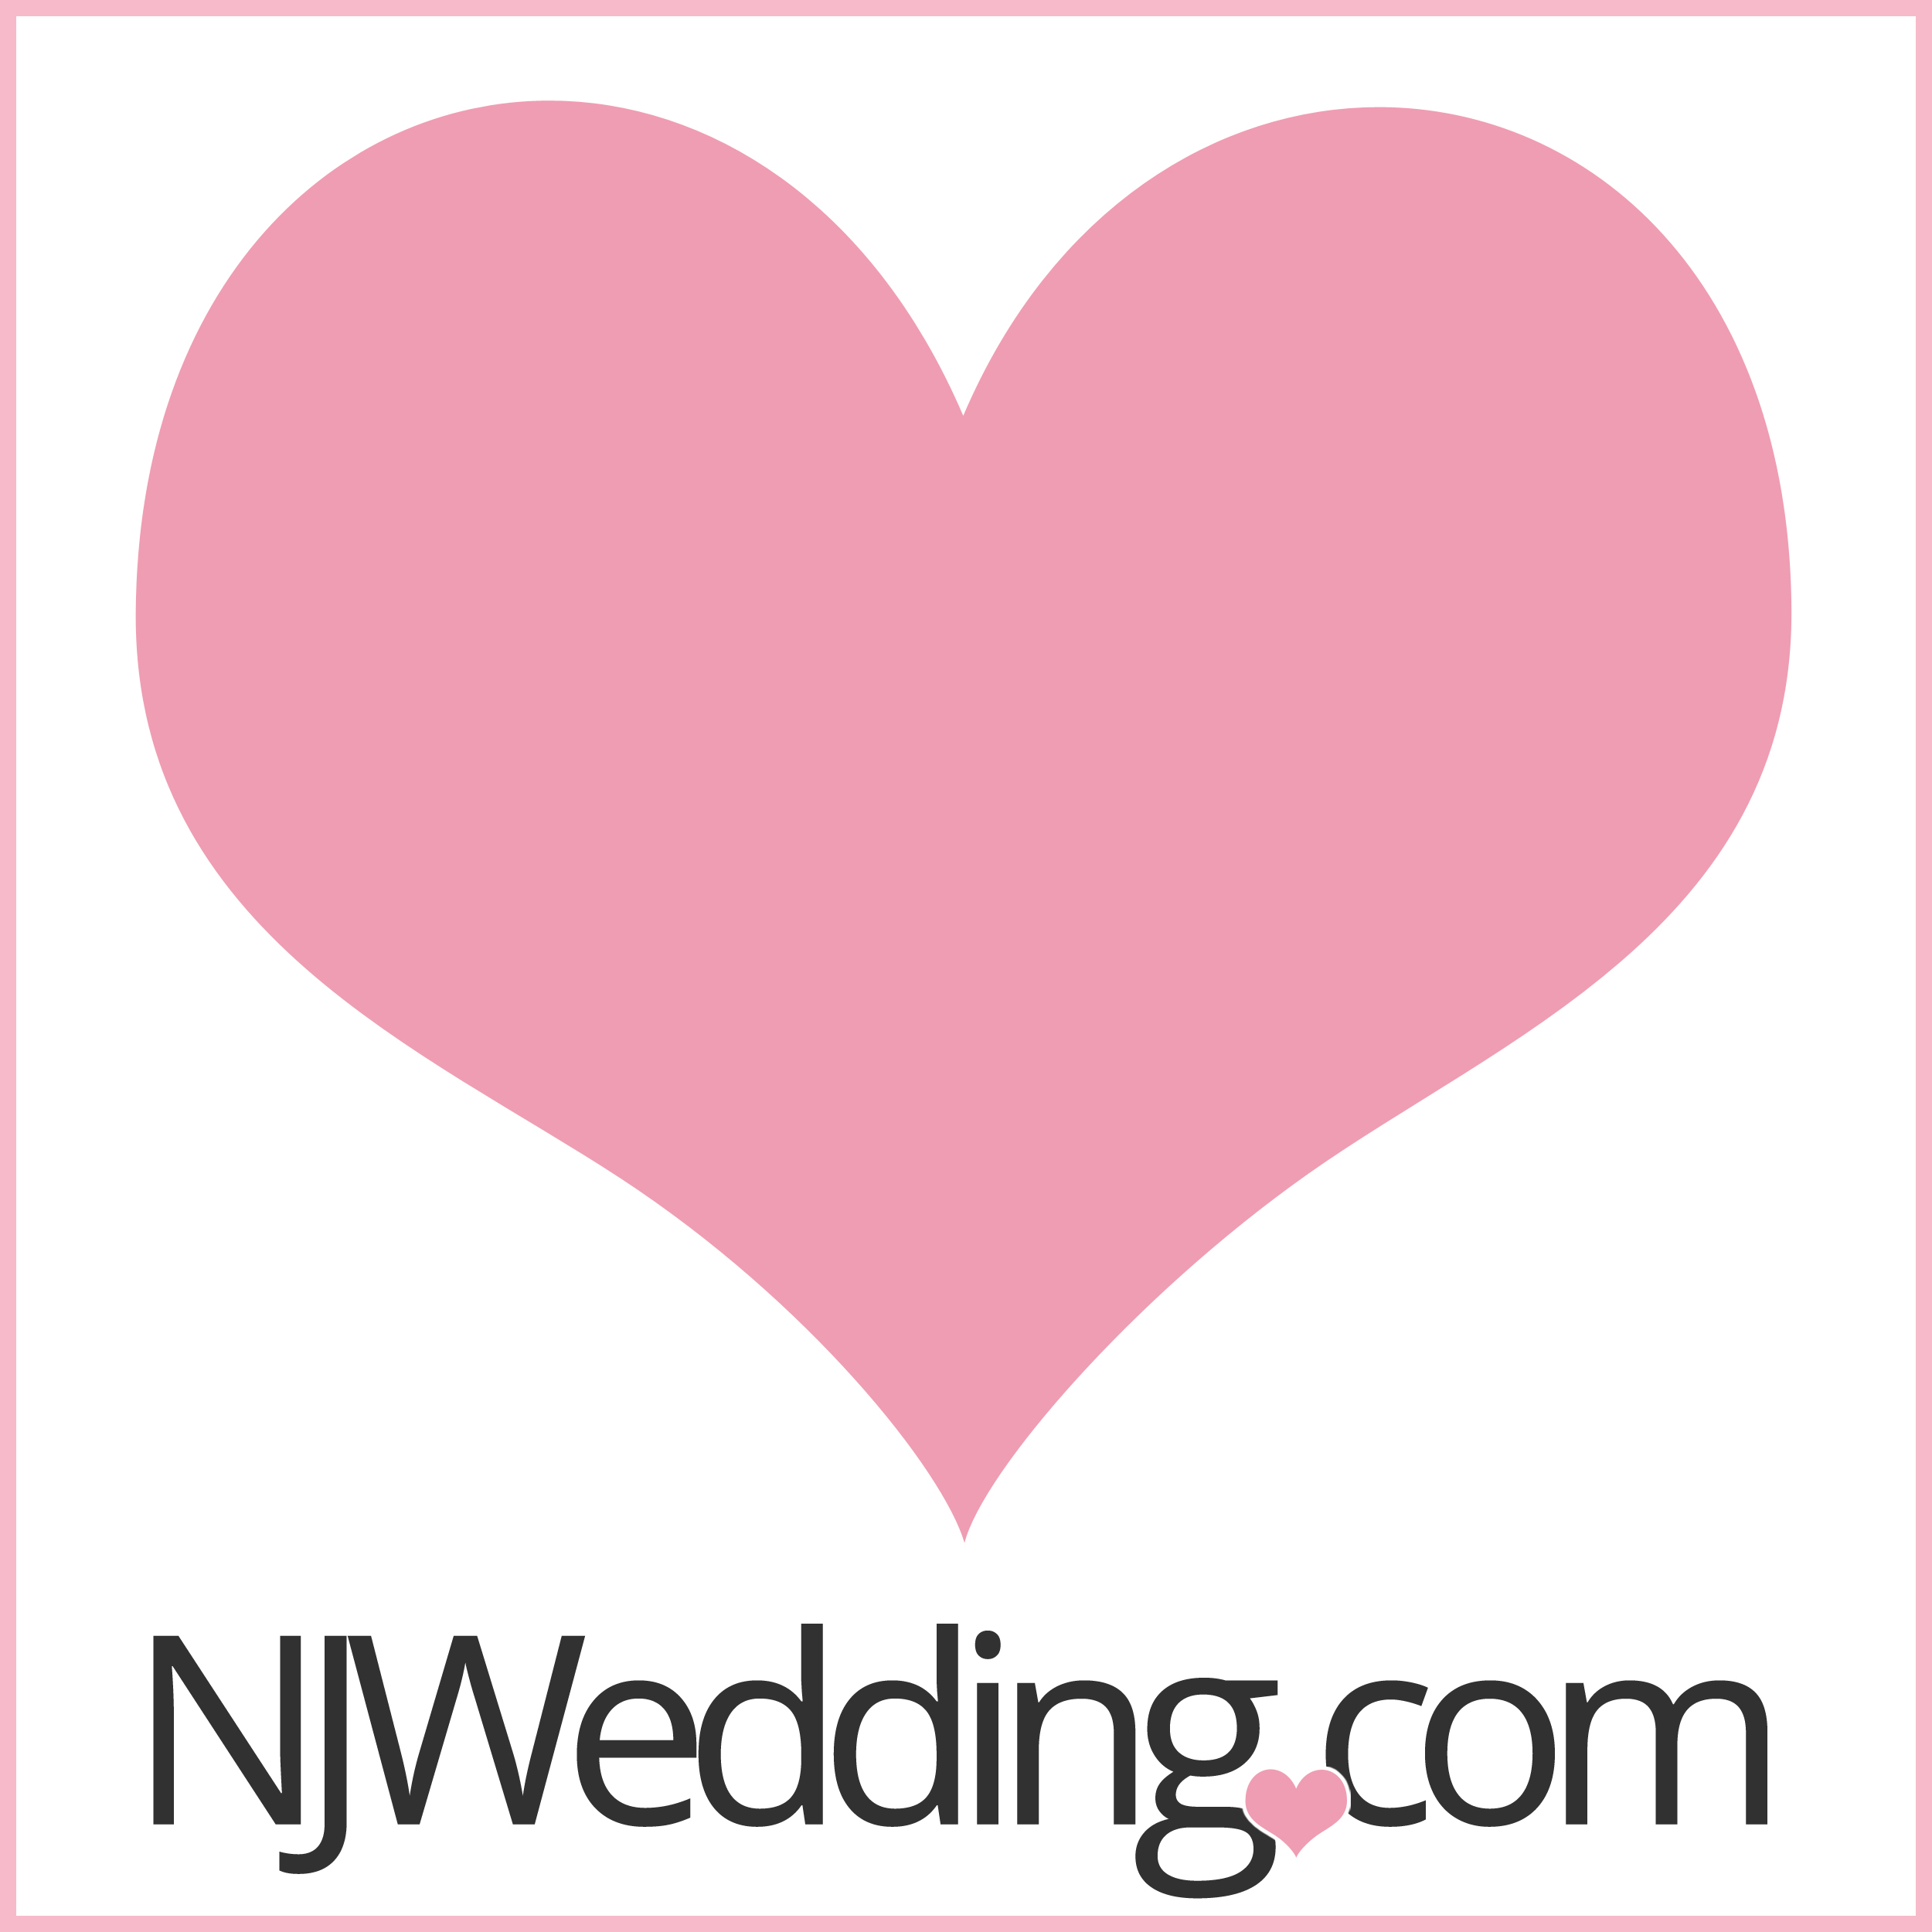 Social media and networking in the wedding industry